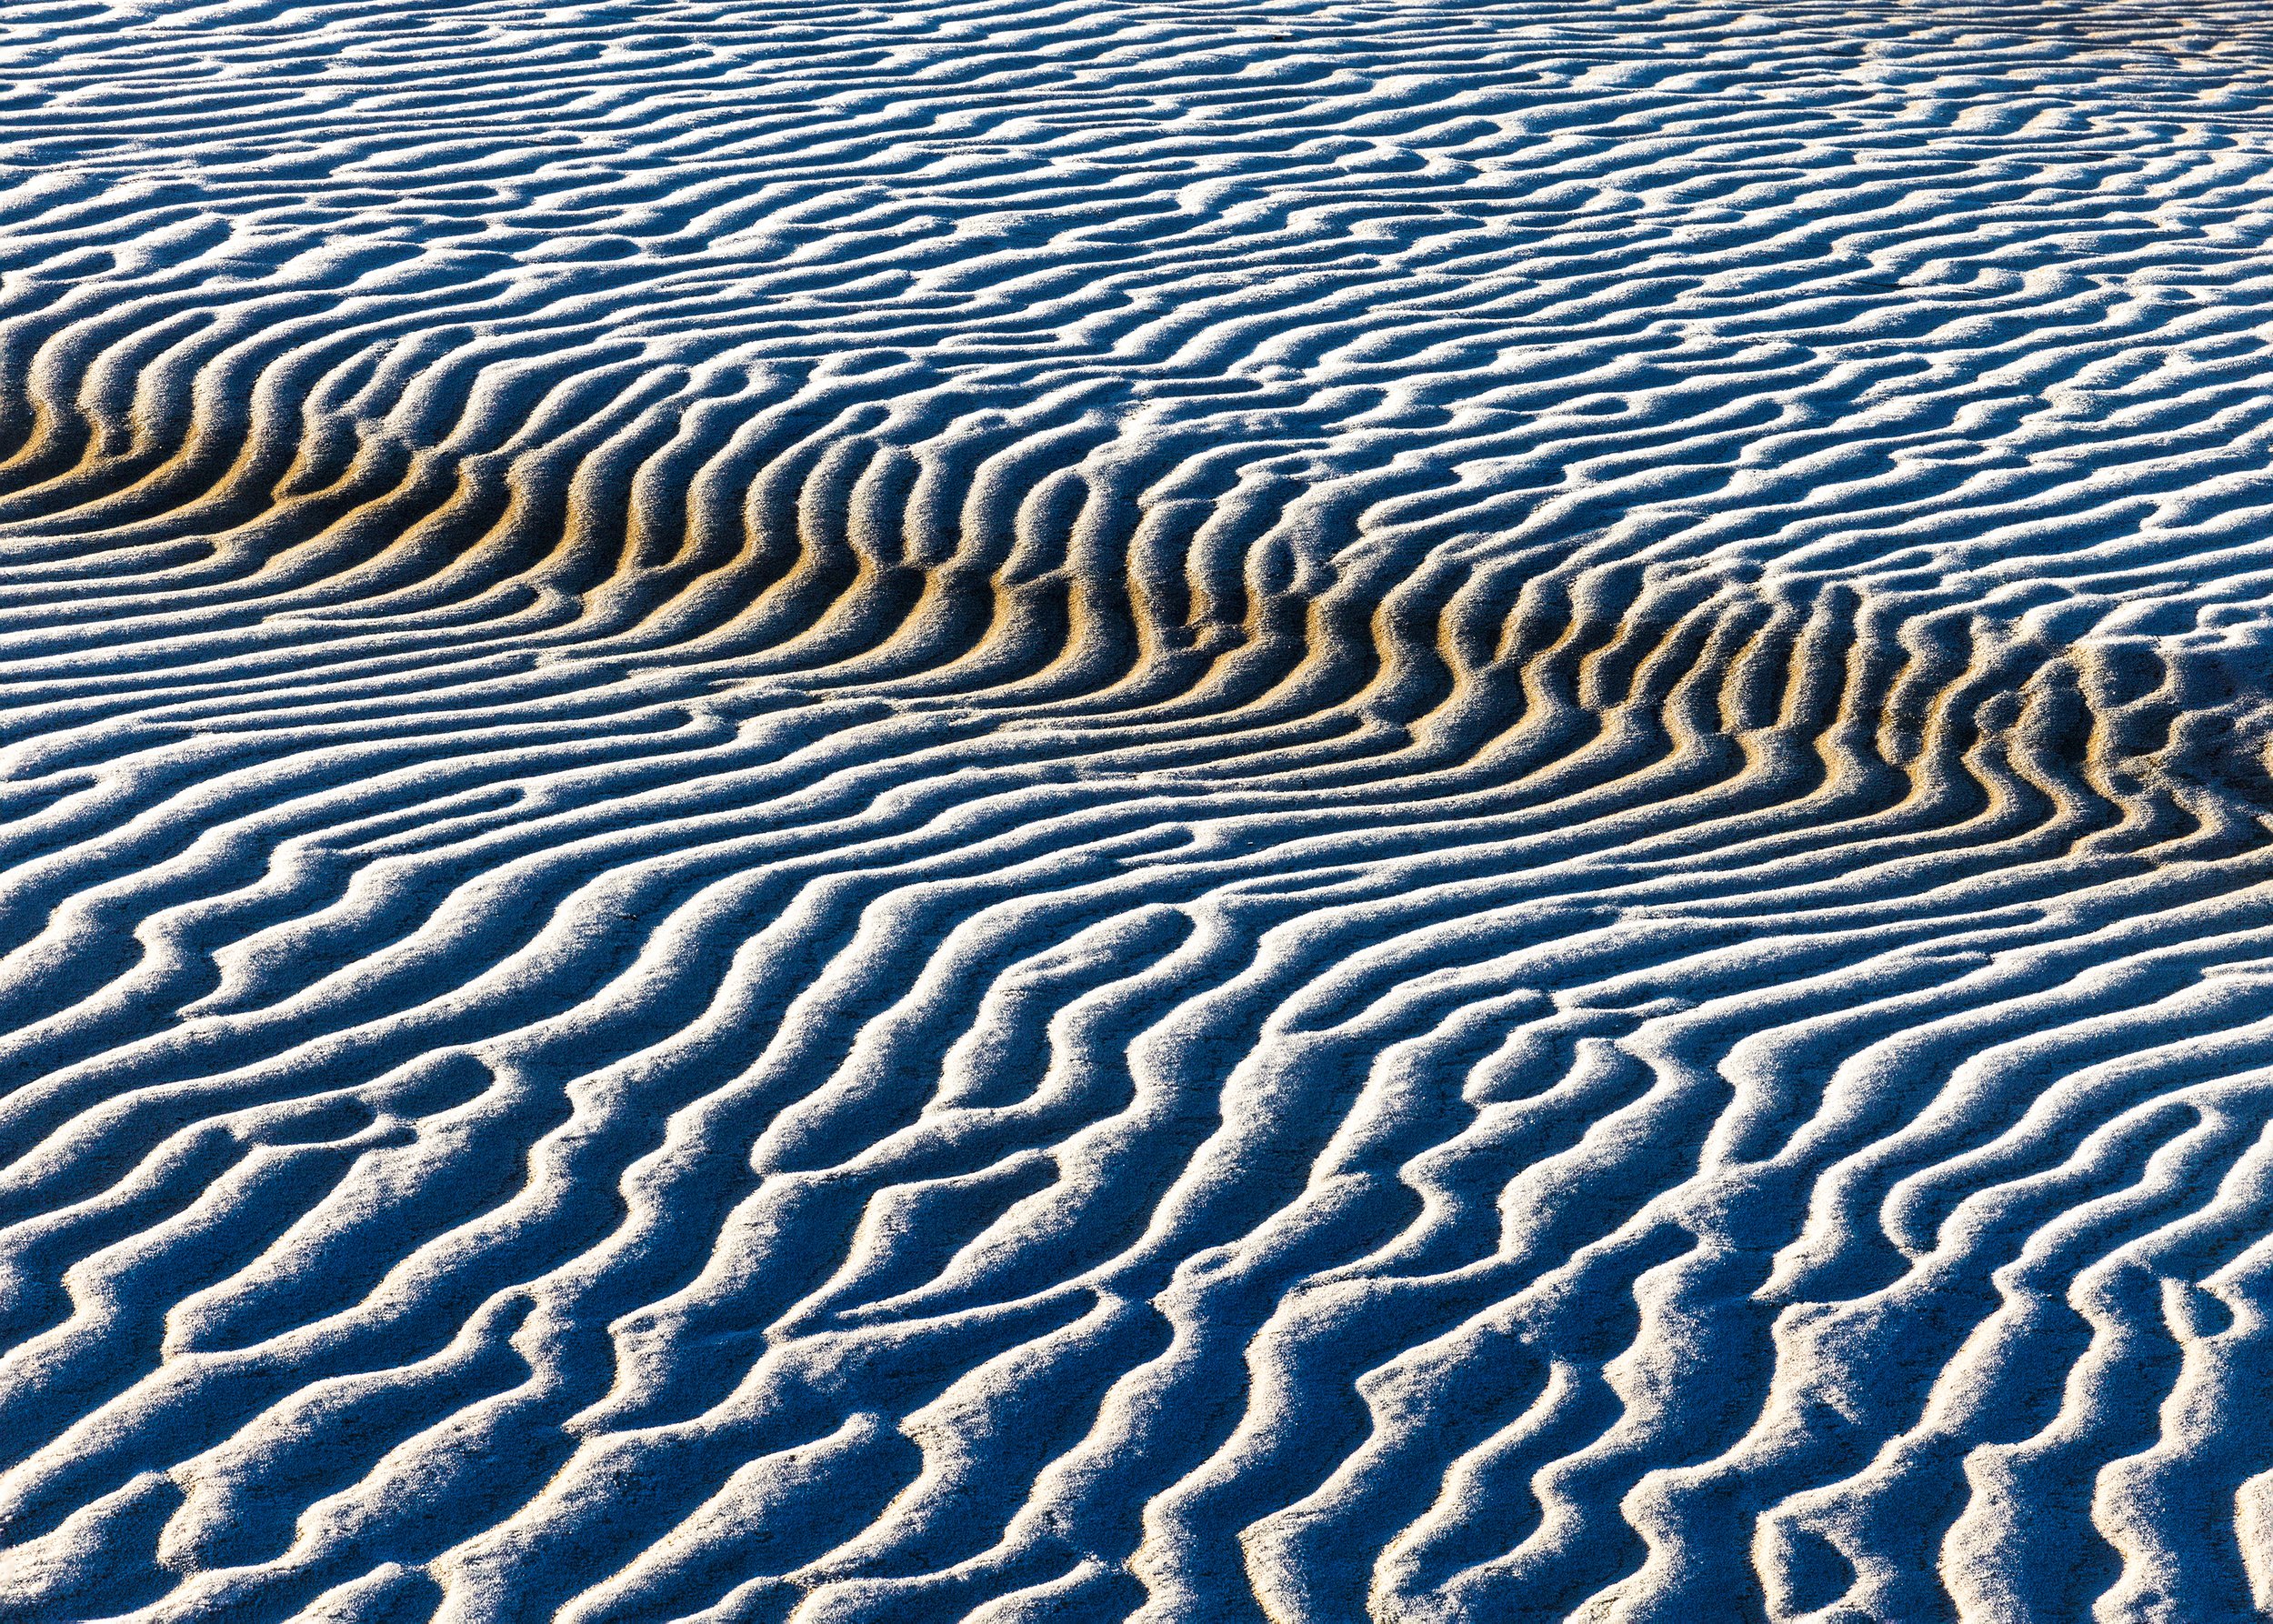  Snow and frost over the sands, in a “brain-like” pattern 